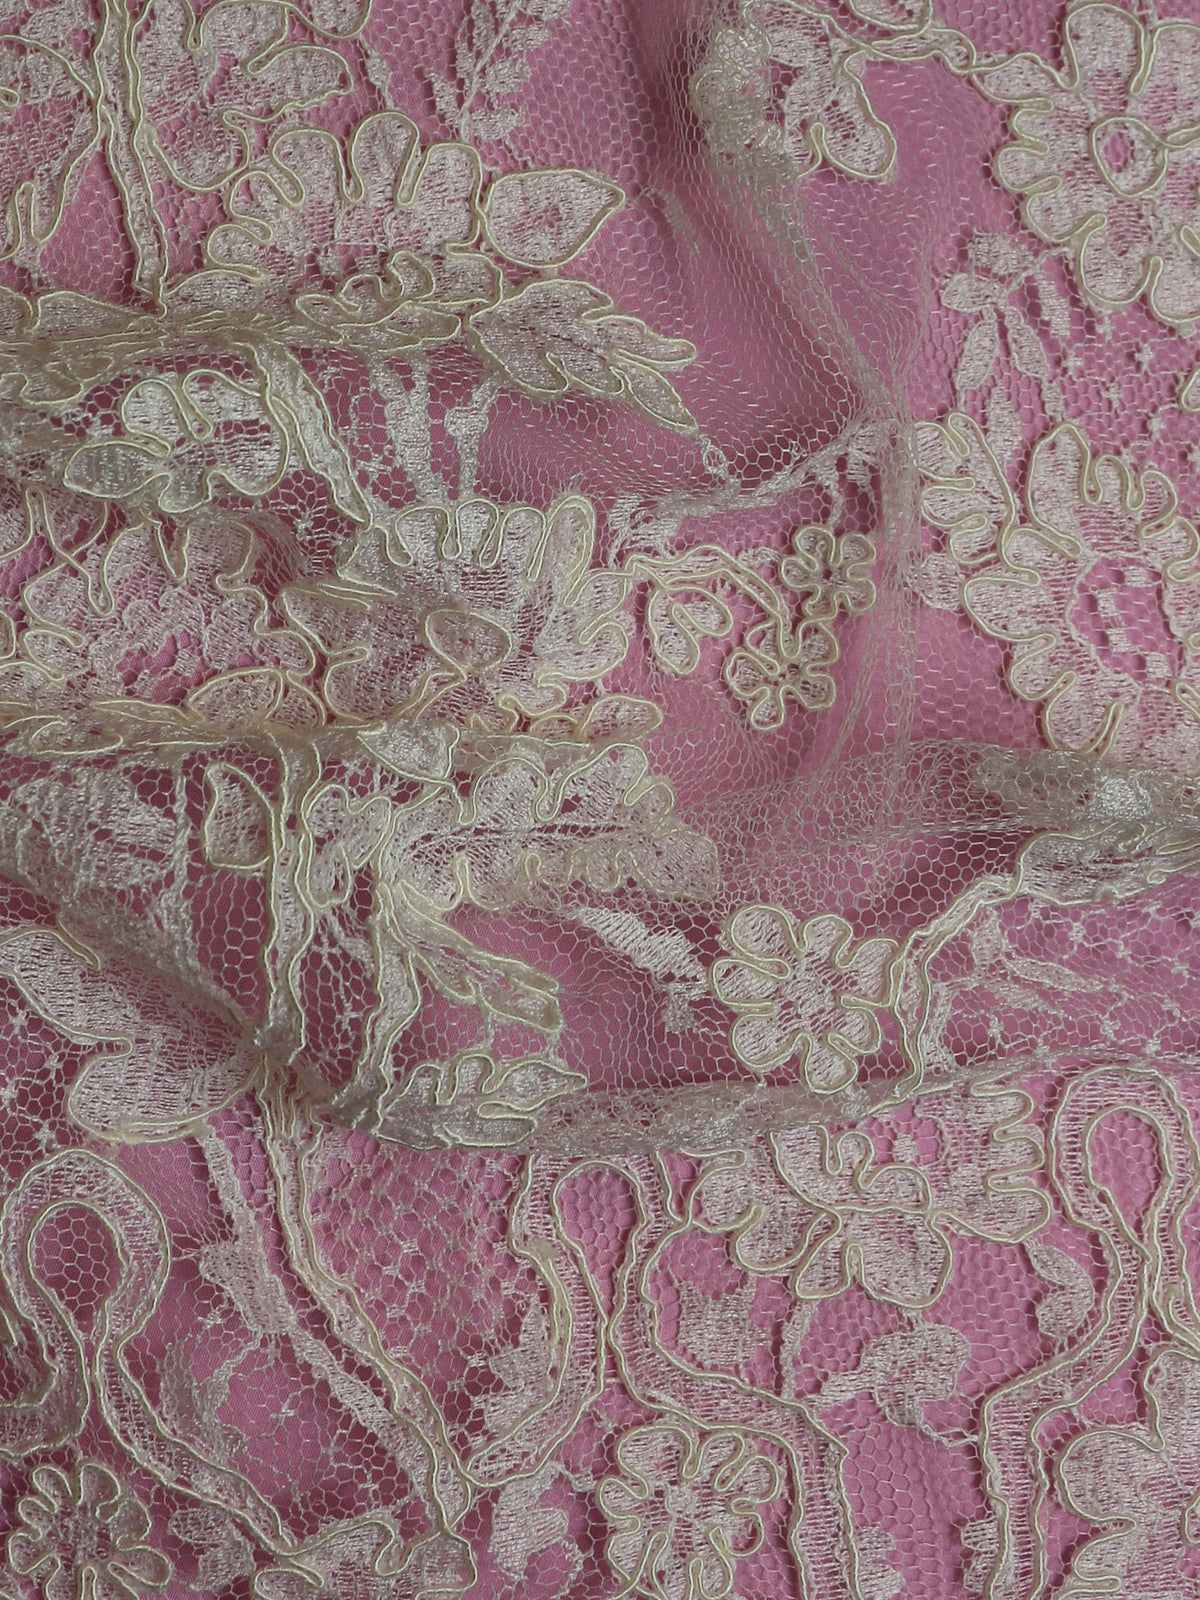 Ivory Corded Chantilly Lace - Marigold